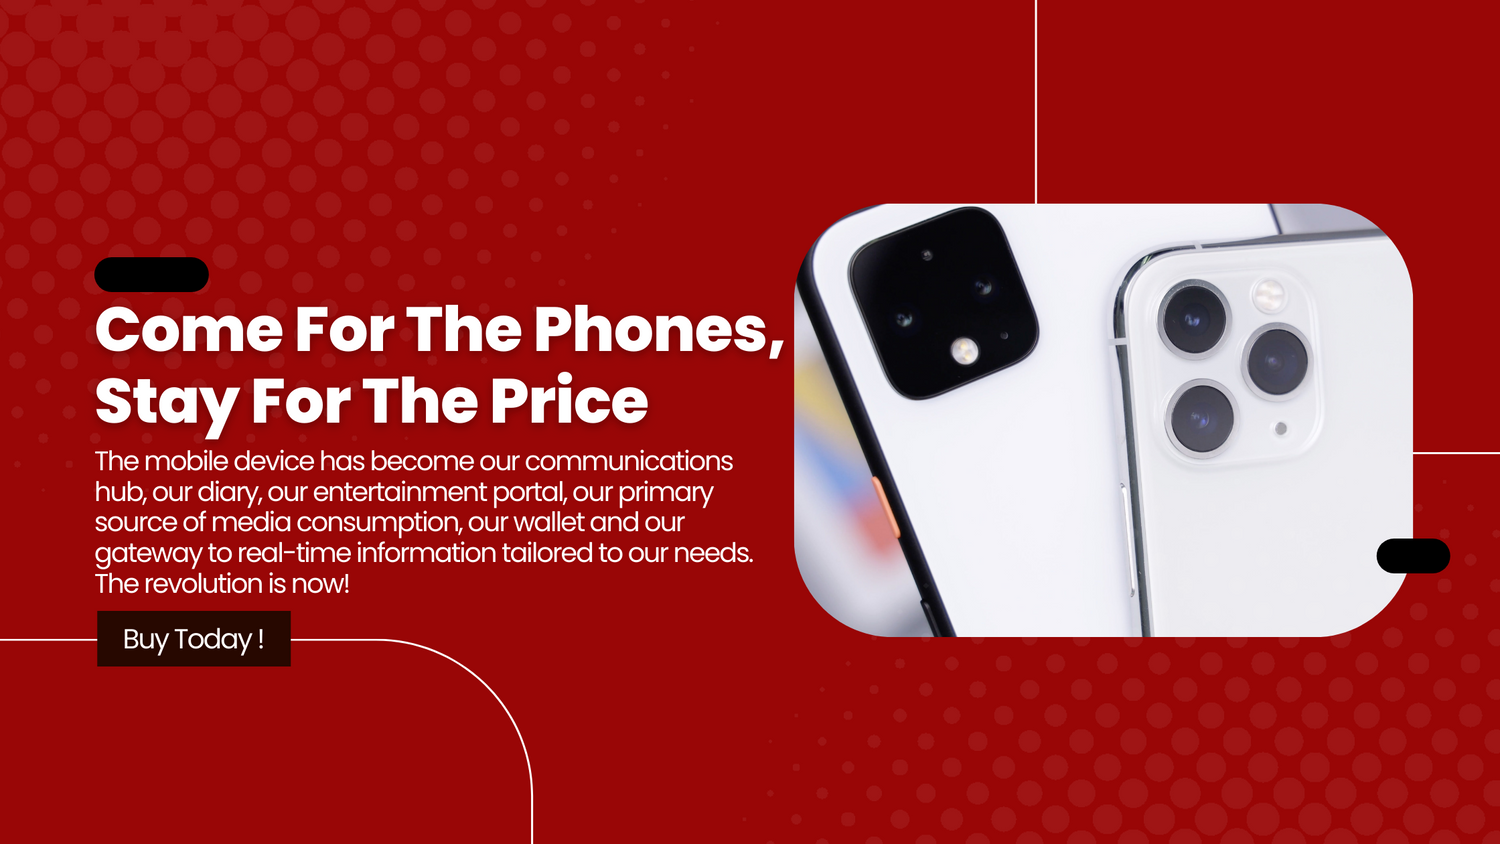 Come For The Phones, Stay For The Price